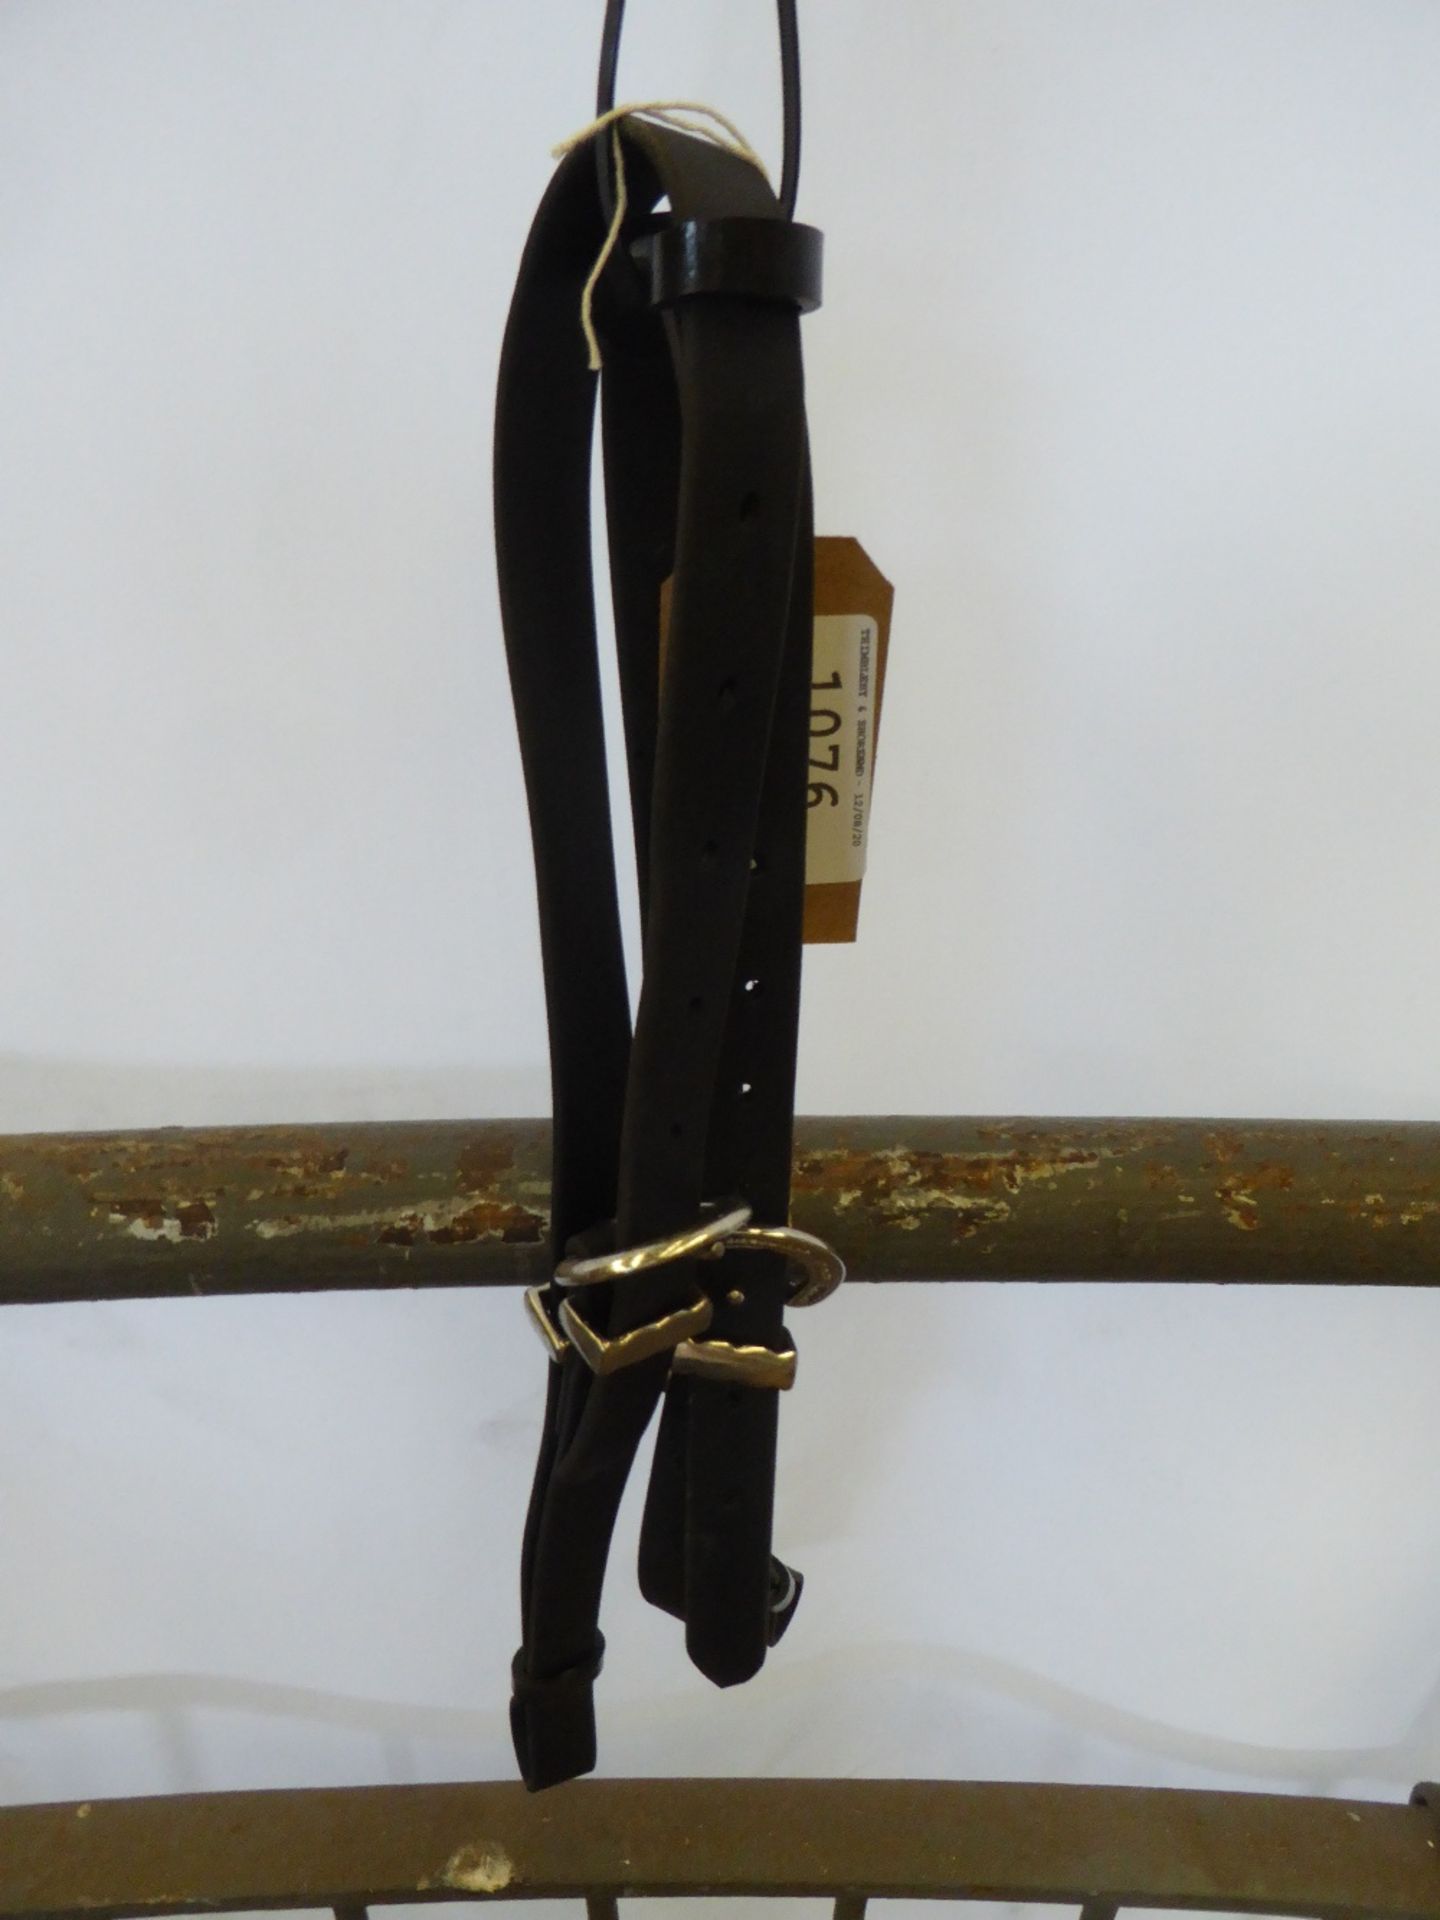 Pair of black cob size biothane breeching straps with horseshoe buckles - carries VAT